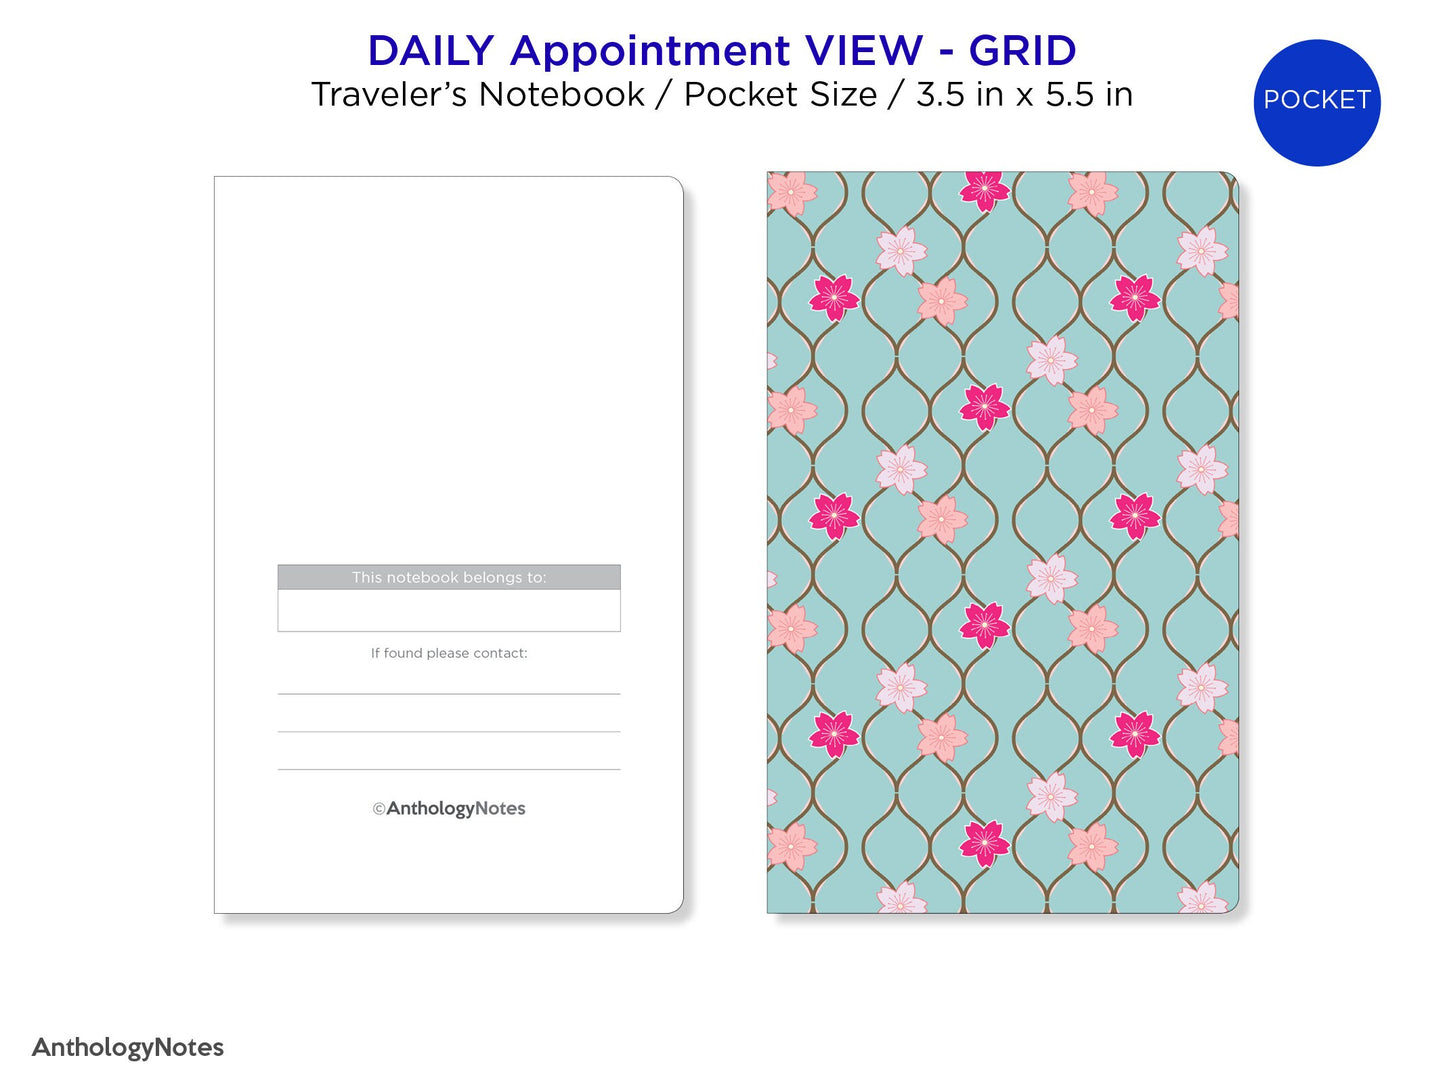 TN POCKET Daily GRID Appointment Schedule Printable Traveler's Notebook Insert